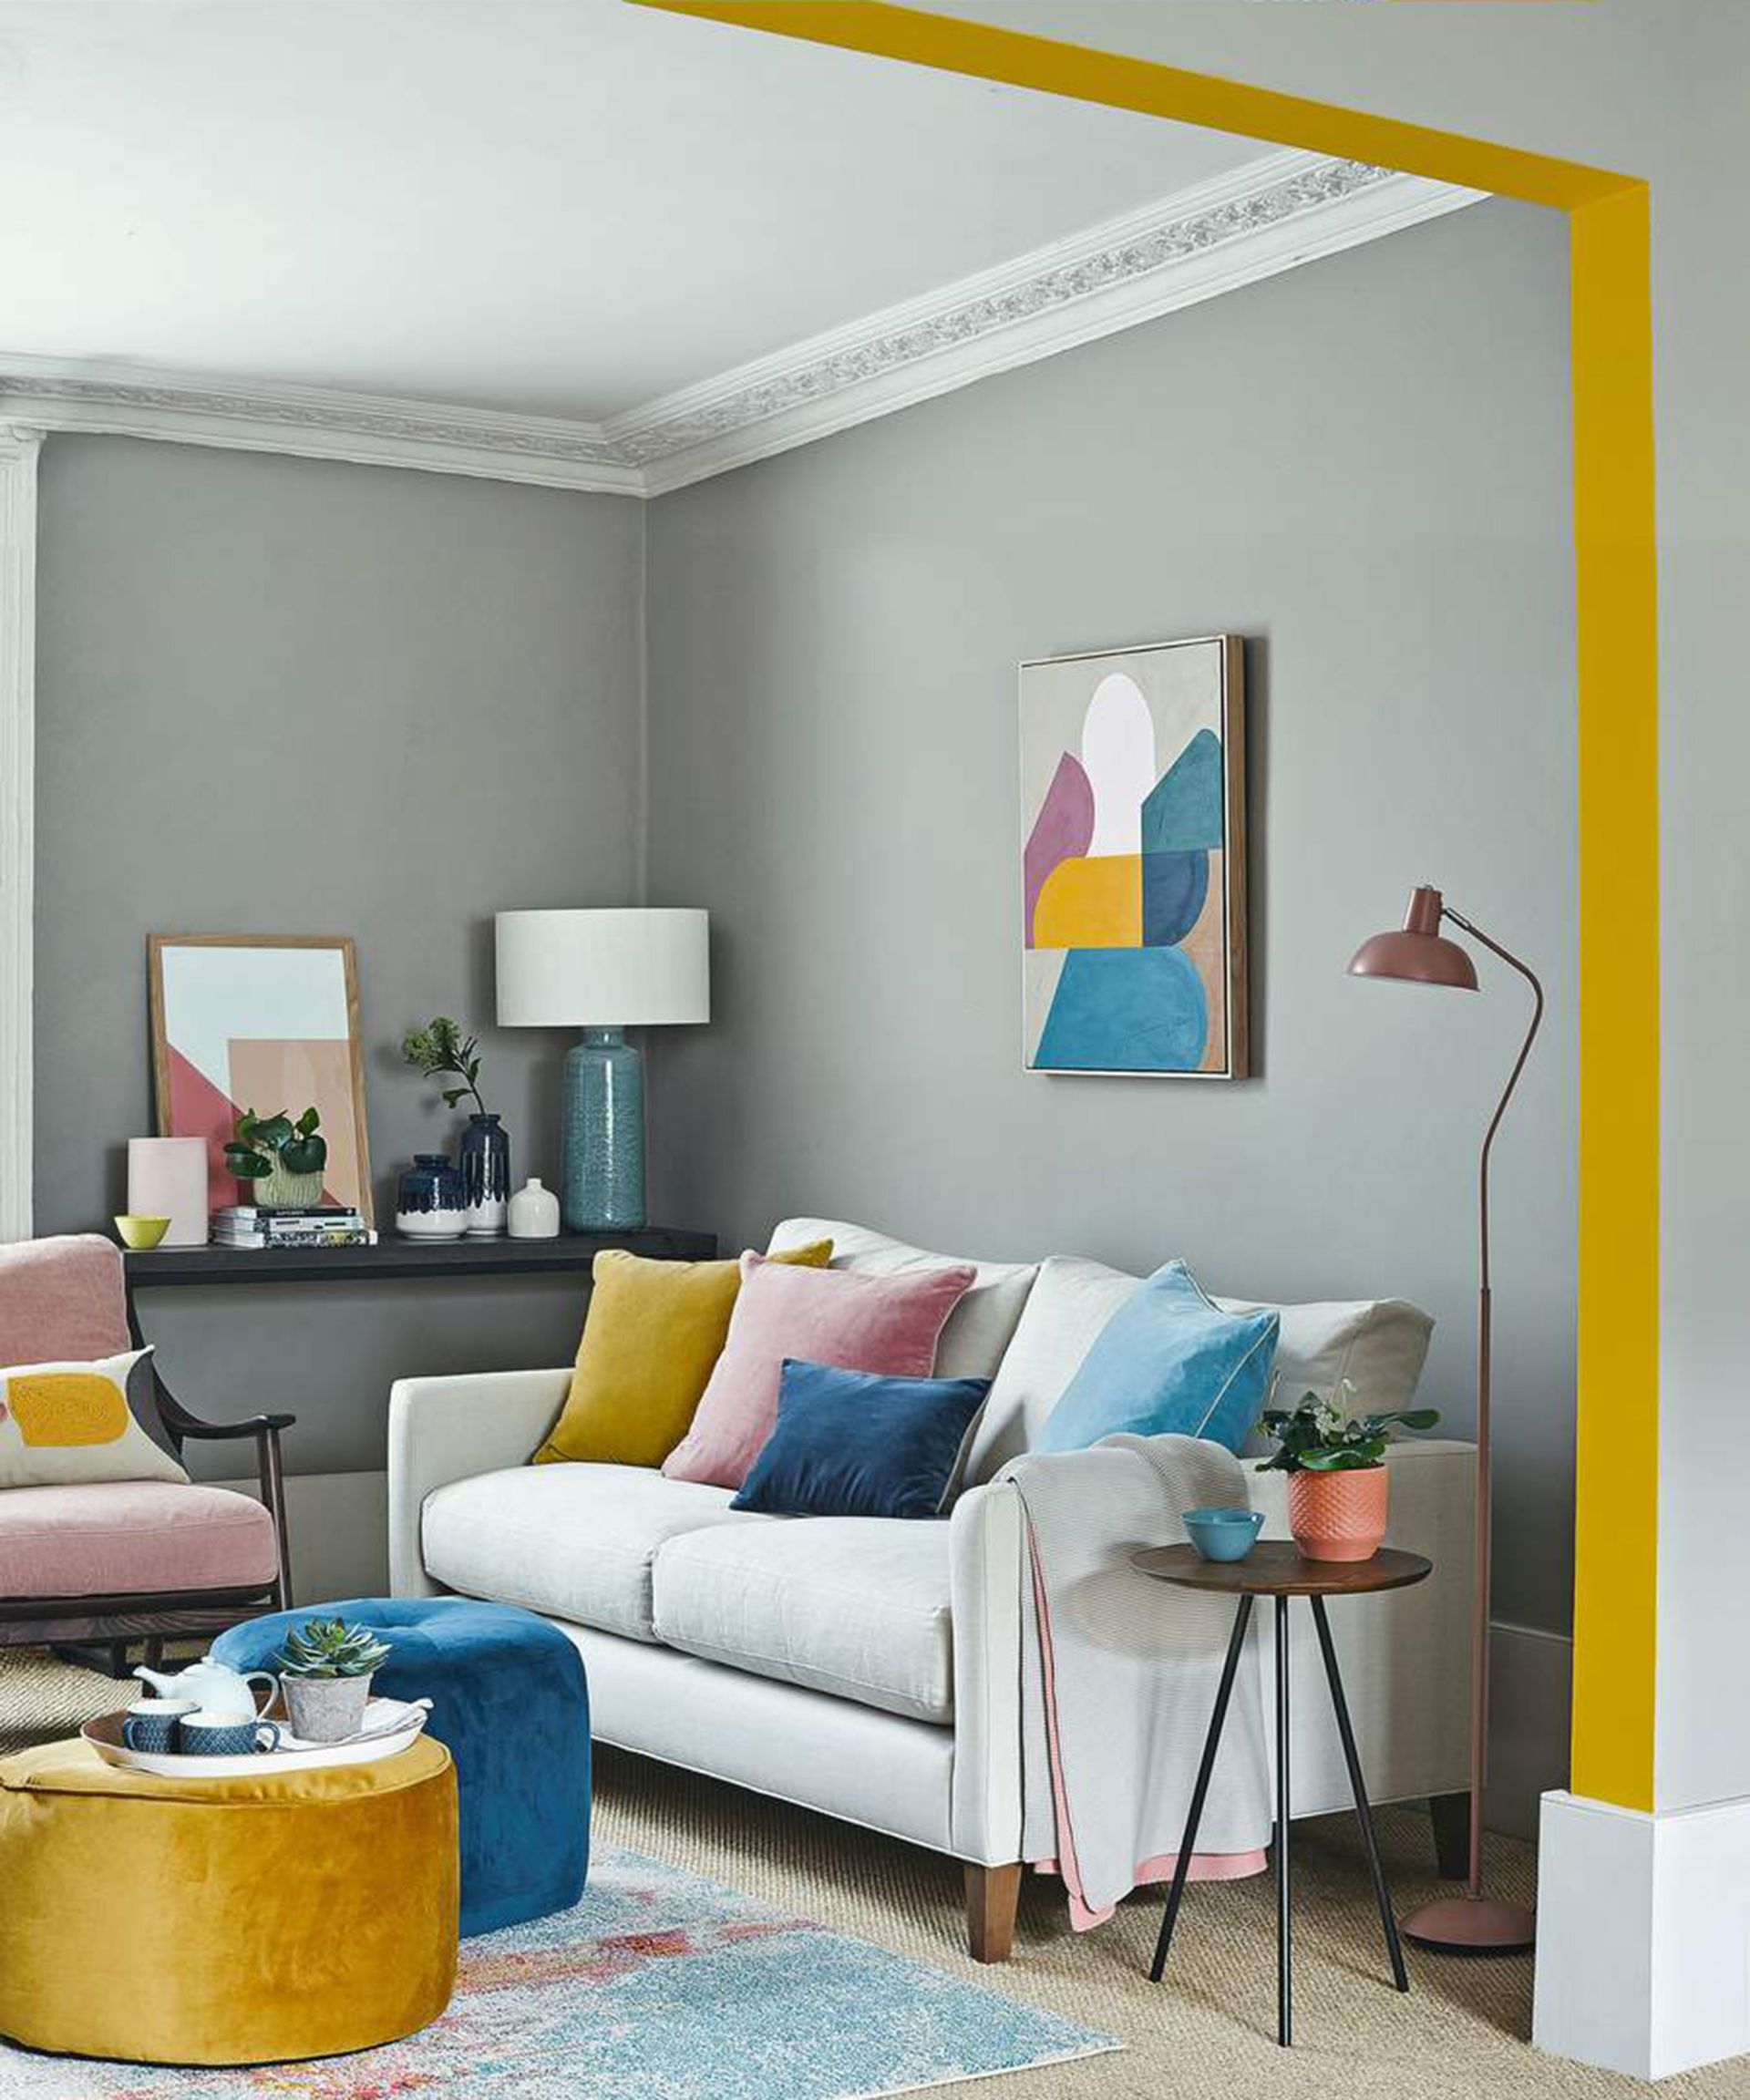 <p>                     If you're a color lover, it's a great idea to see a pale grey as a simple blank canvas from which you can mix and match colors of your choice. Like with many interior design rules, think odd numbers. In the above image, three colors are used together throughout the space in various shades - pink, blue and yellow – and it works to bring life to the neutral gray scheme.                    </p>                                      <p>                     Yellow and gray living rooms are a popular choice as this color combo never disappoints.                       </p>